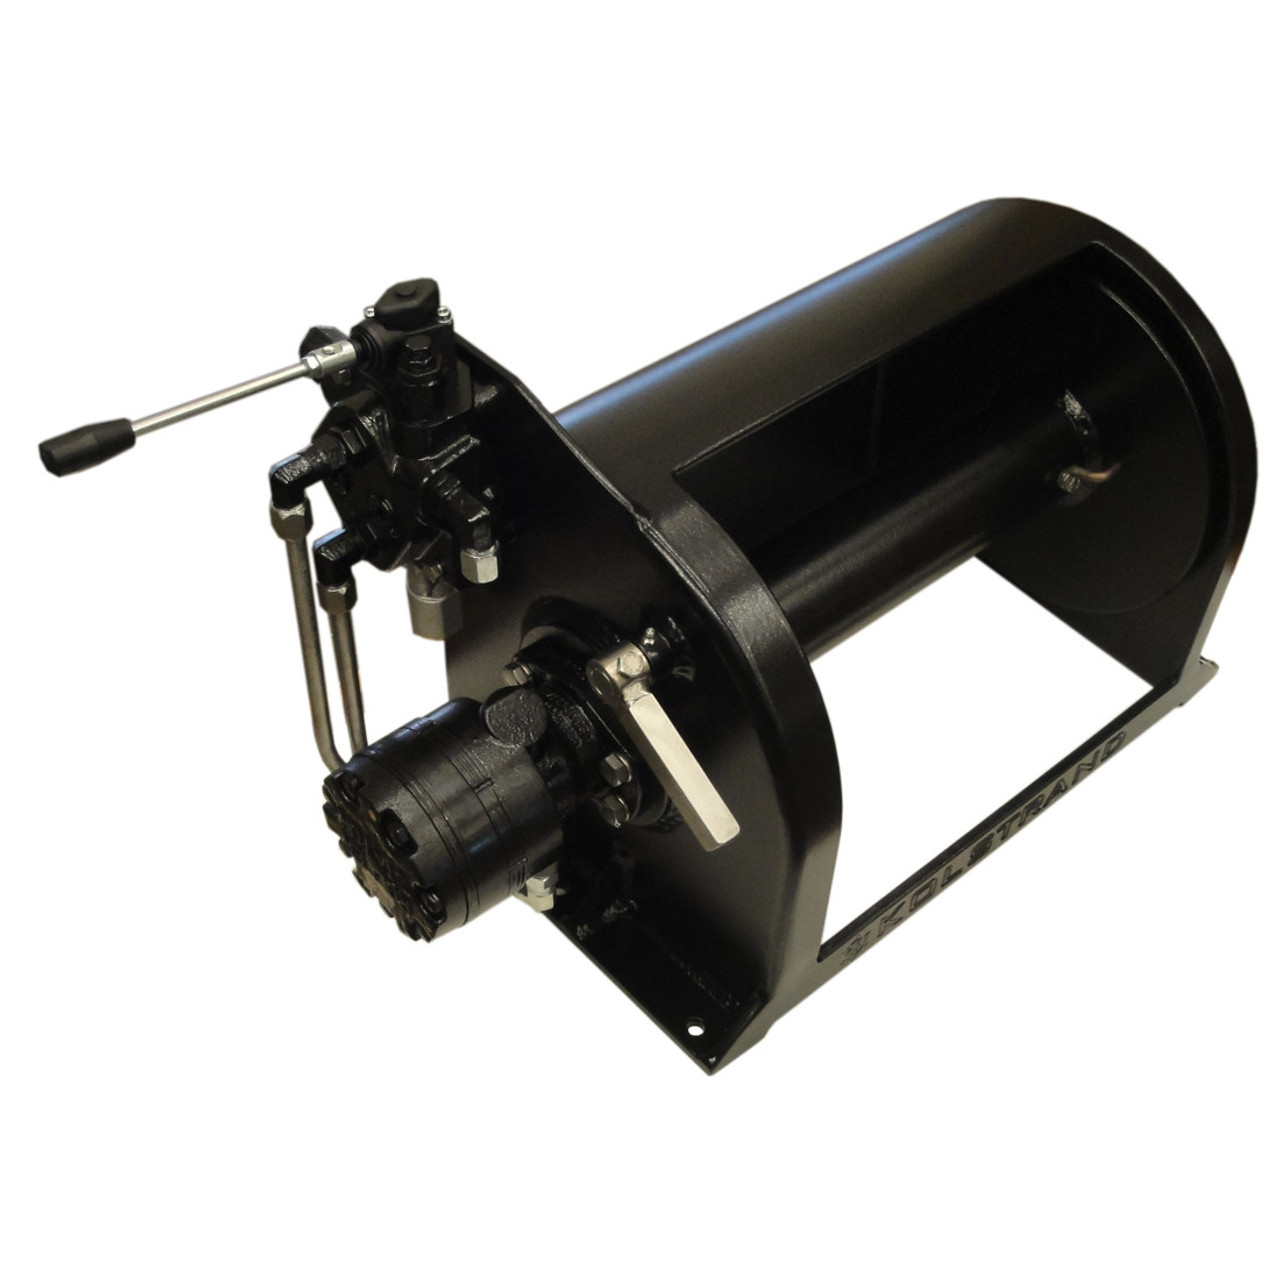 Kolstrand 12 Inch Anchor Winch - With 12 In Diameter X 16 In Wide Drum - Black Powder Coating